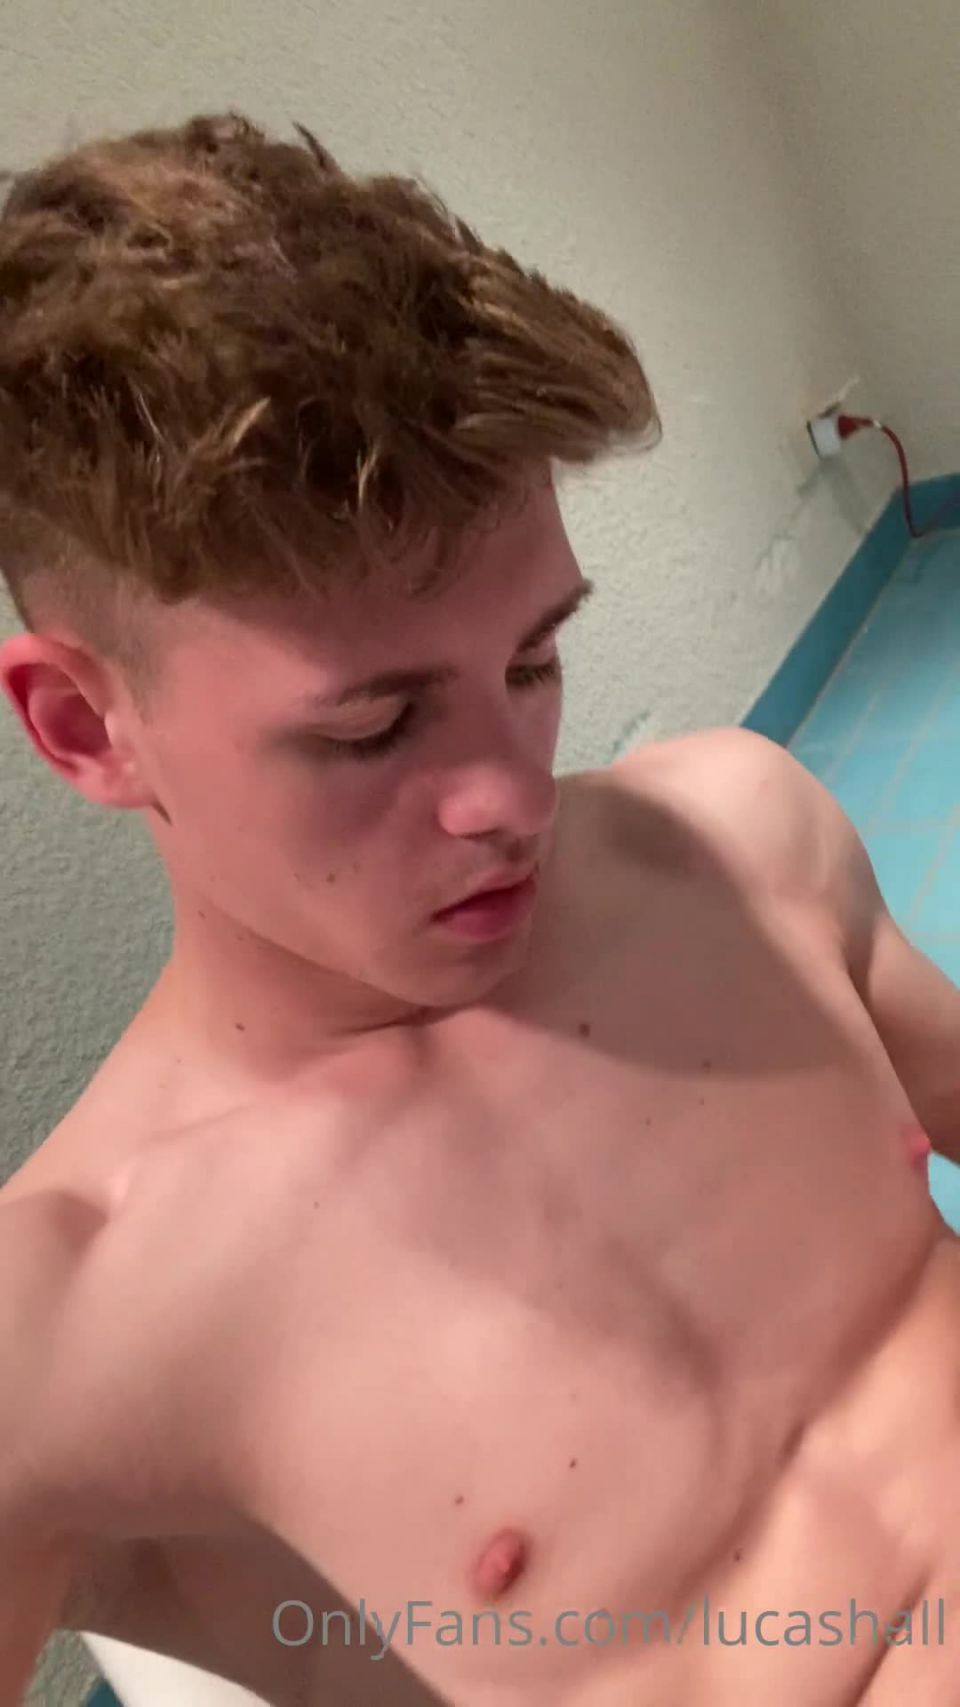 Lucas Hall () Lucashall - imagine me doing this in front of u u like me fingering myself 30-05-2020